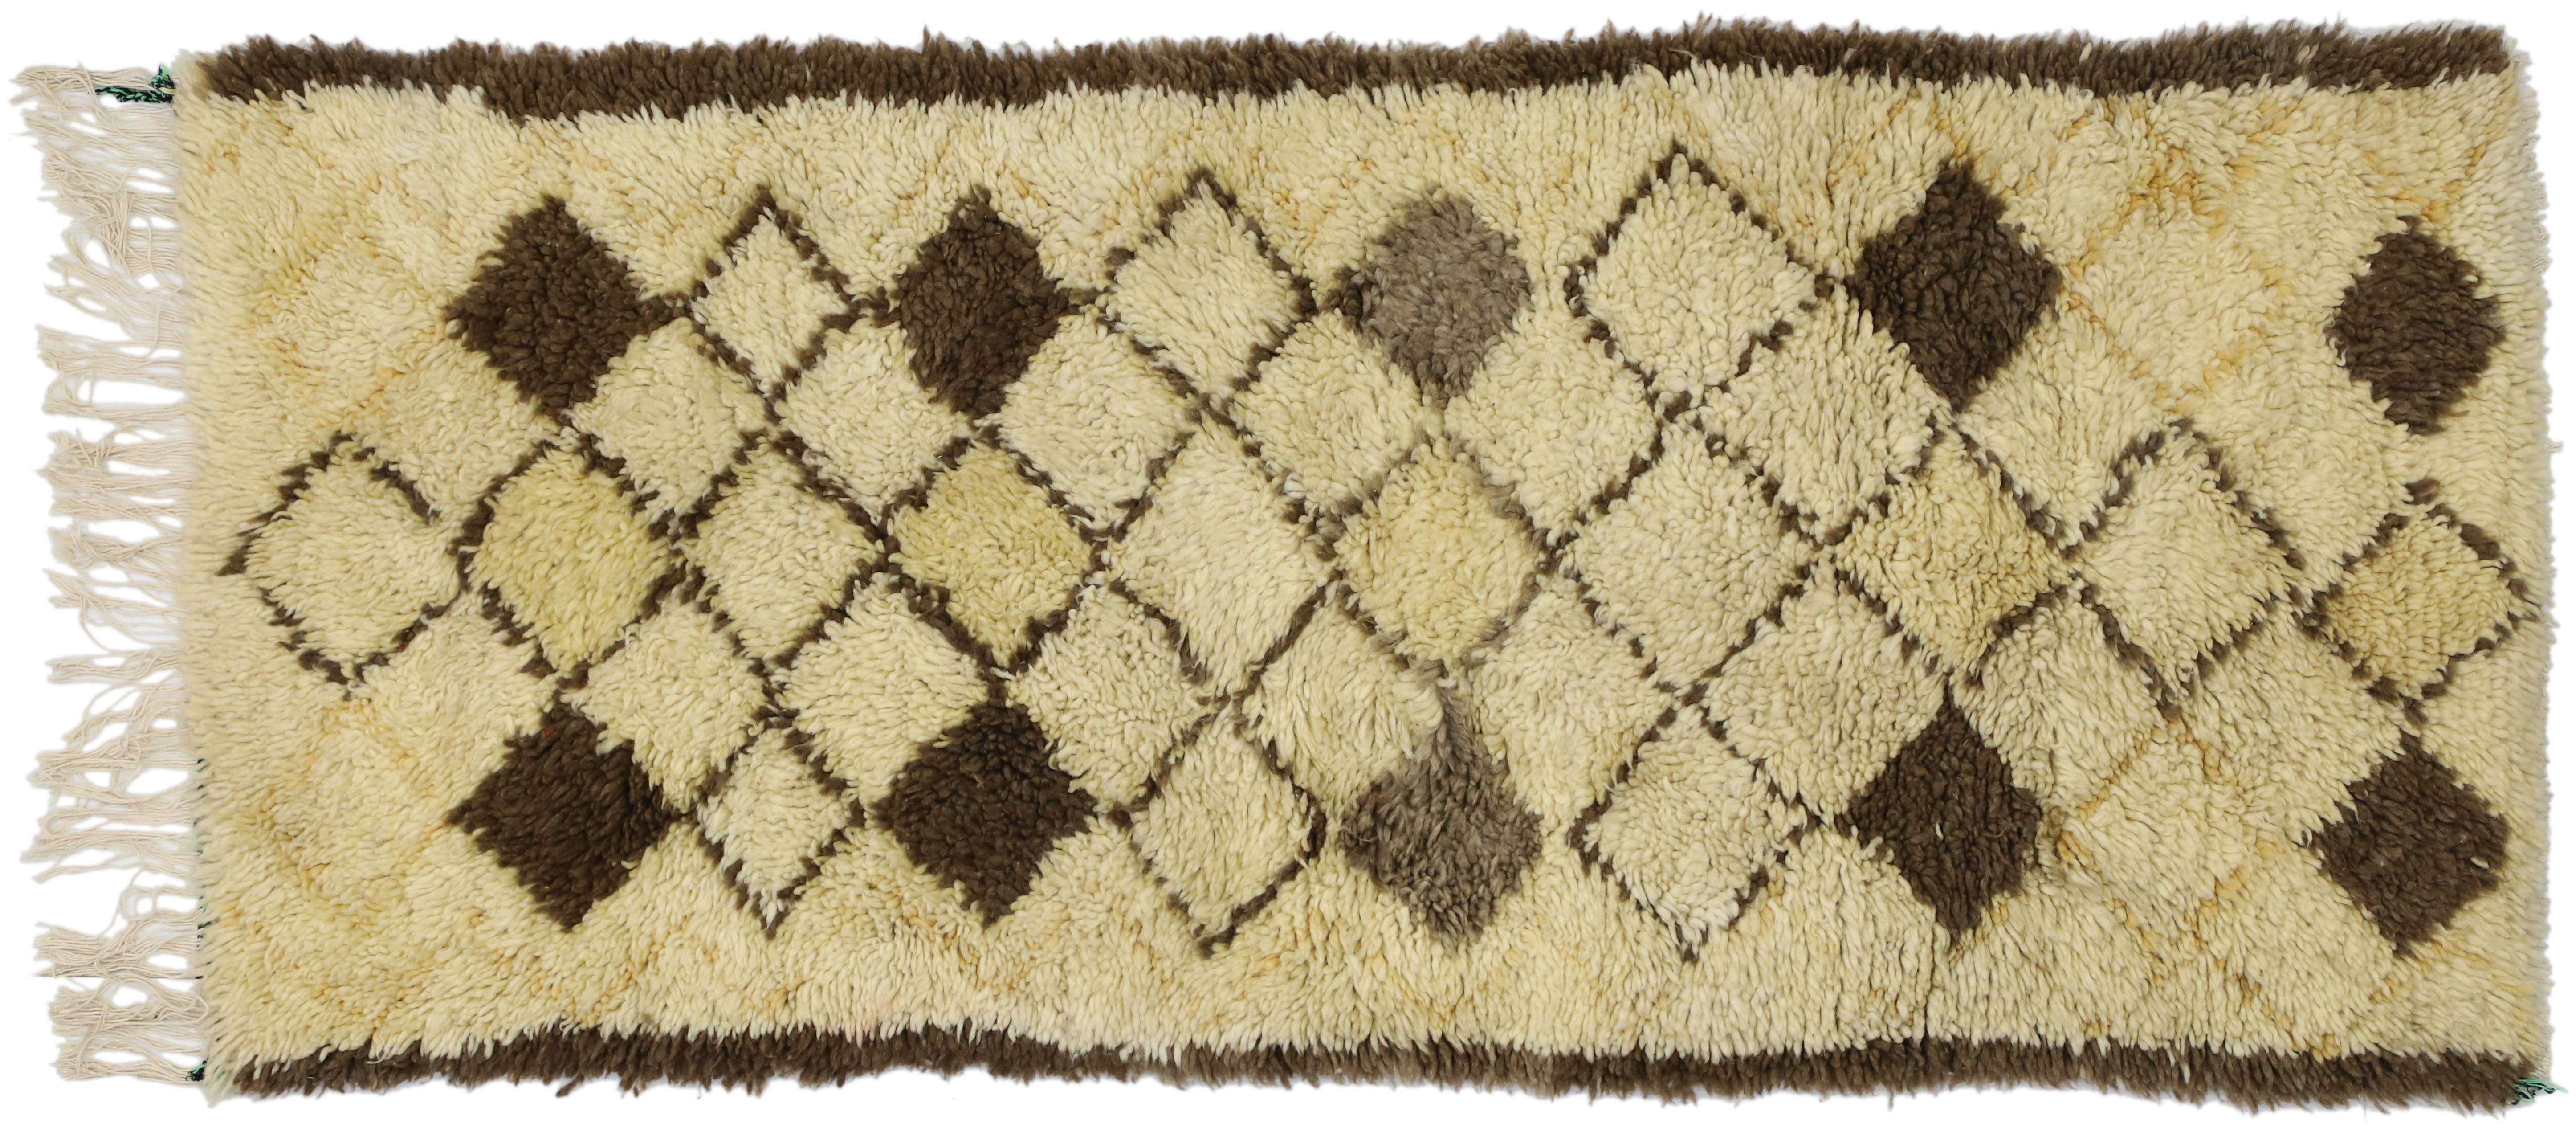 Vintage Moroccan Azilal Rug, Neutral Berber Moroccan Rug with Neutral Colors 2